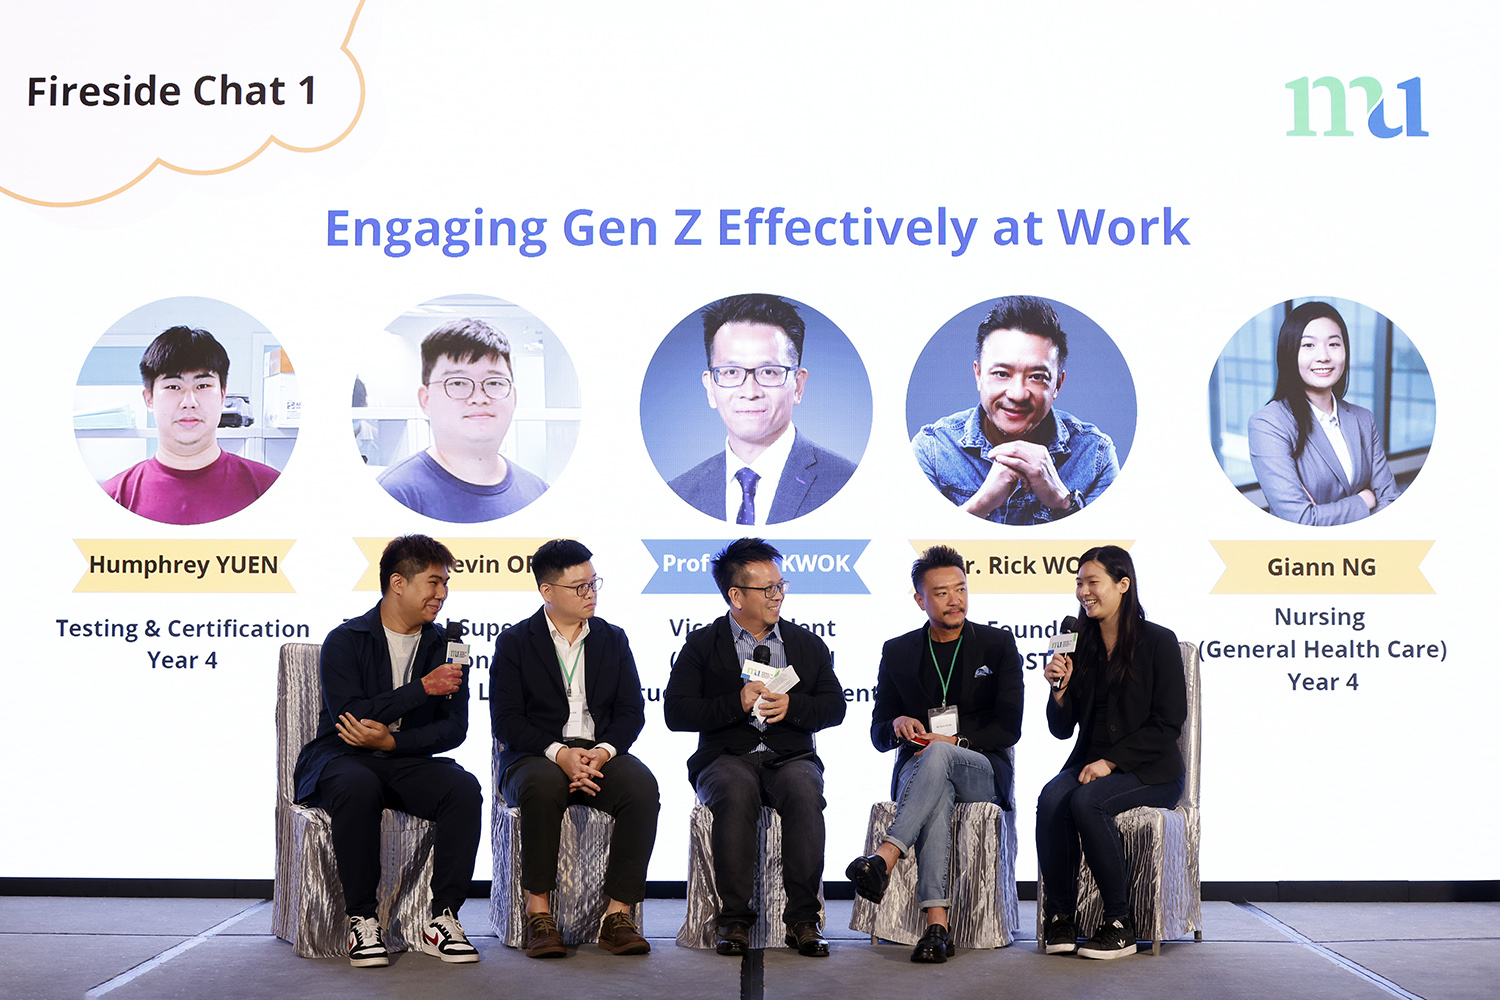 HKMU Vice President (Research and Student Development) Prof. Ricky Kwok Yu-kwong (centre) exchanges with employer representatives from FSE Environmental Solutions Limited (second left) and LOST (second right), and HKMU students on stage. 